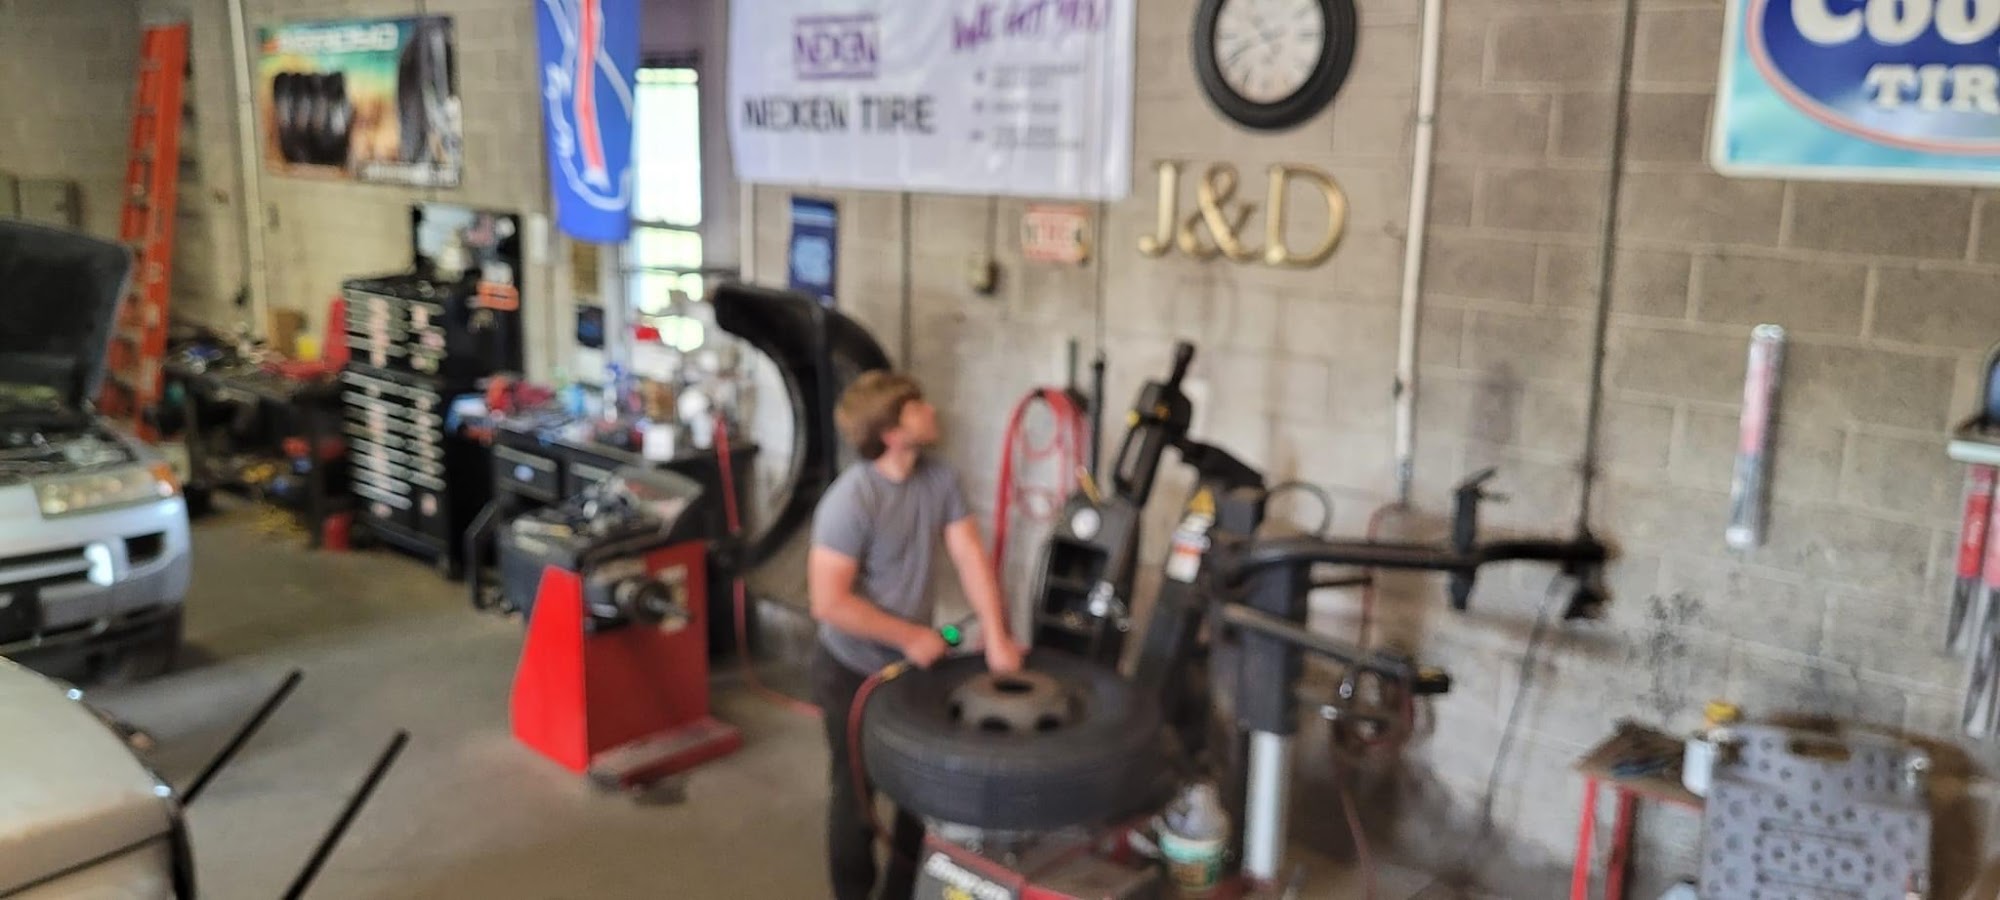 J and D Tire and Automotive